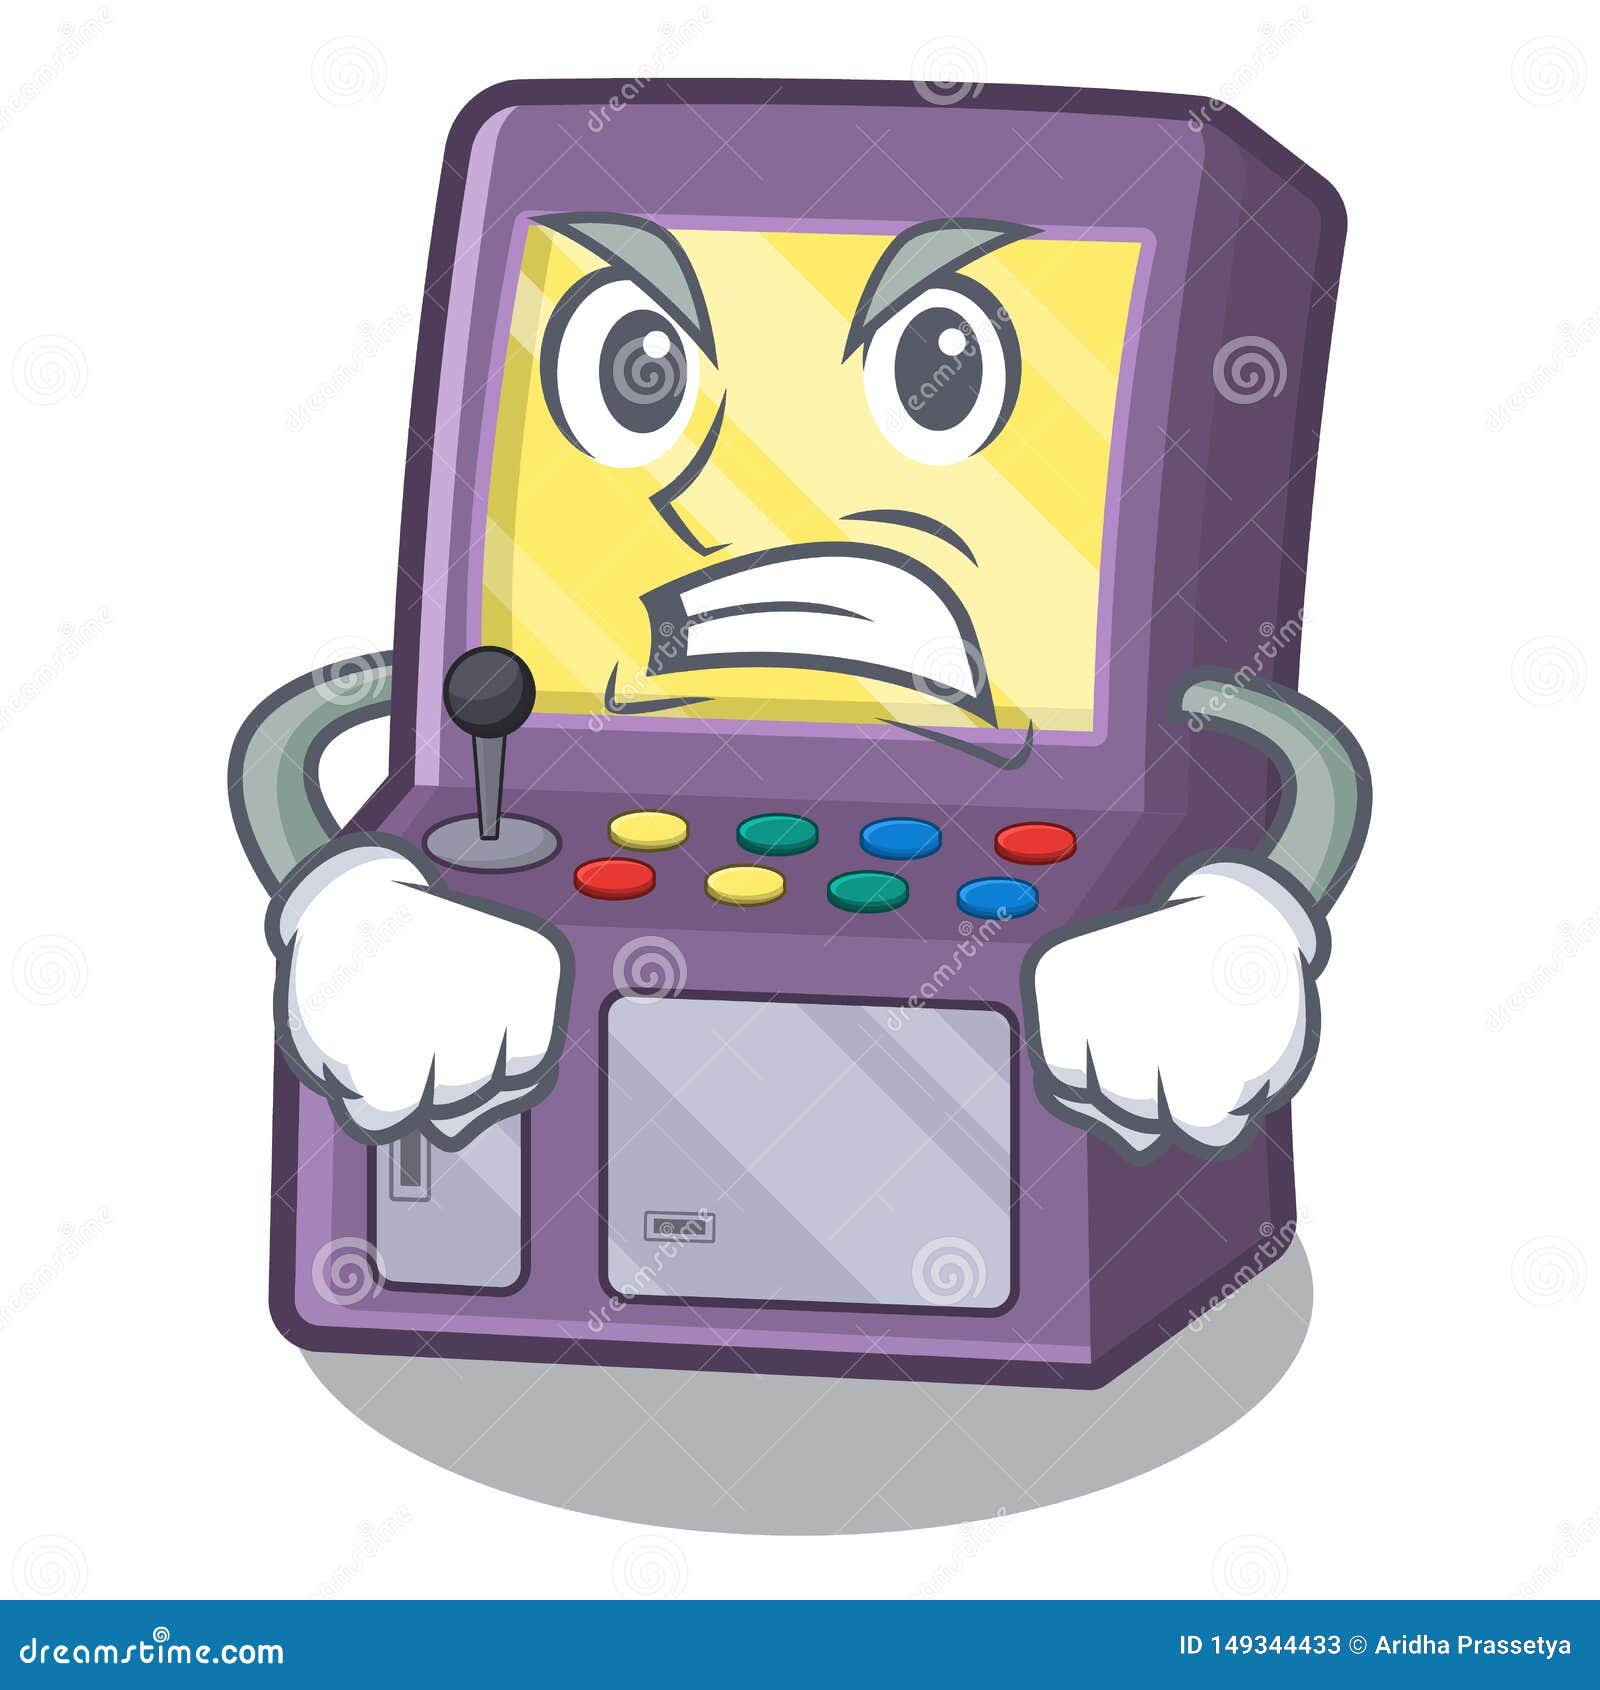 Angry Arcade Machine Next To Mascot Table Stock Vector - Illustration ...